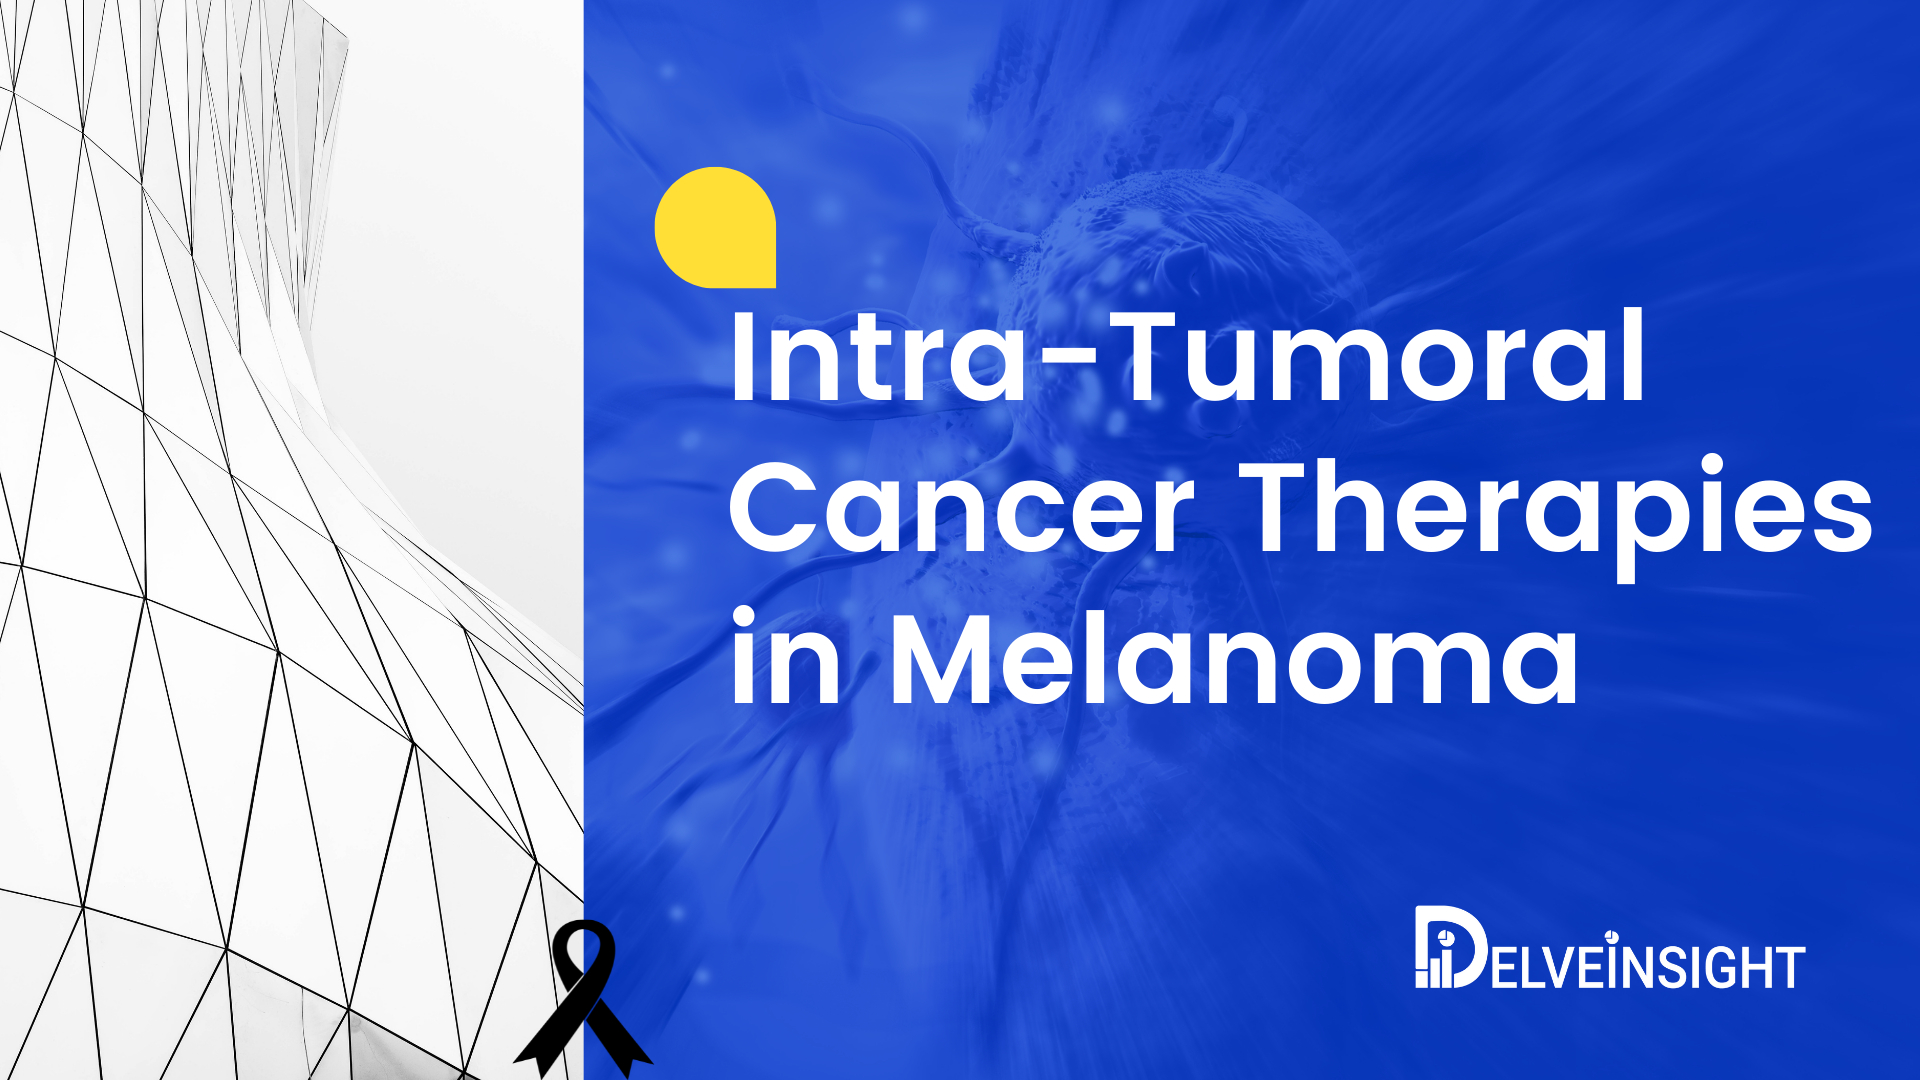 Intra-Tumoral Cancer Therapies in Melanoma